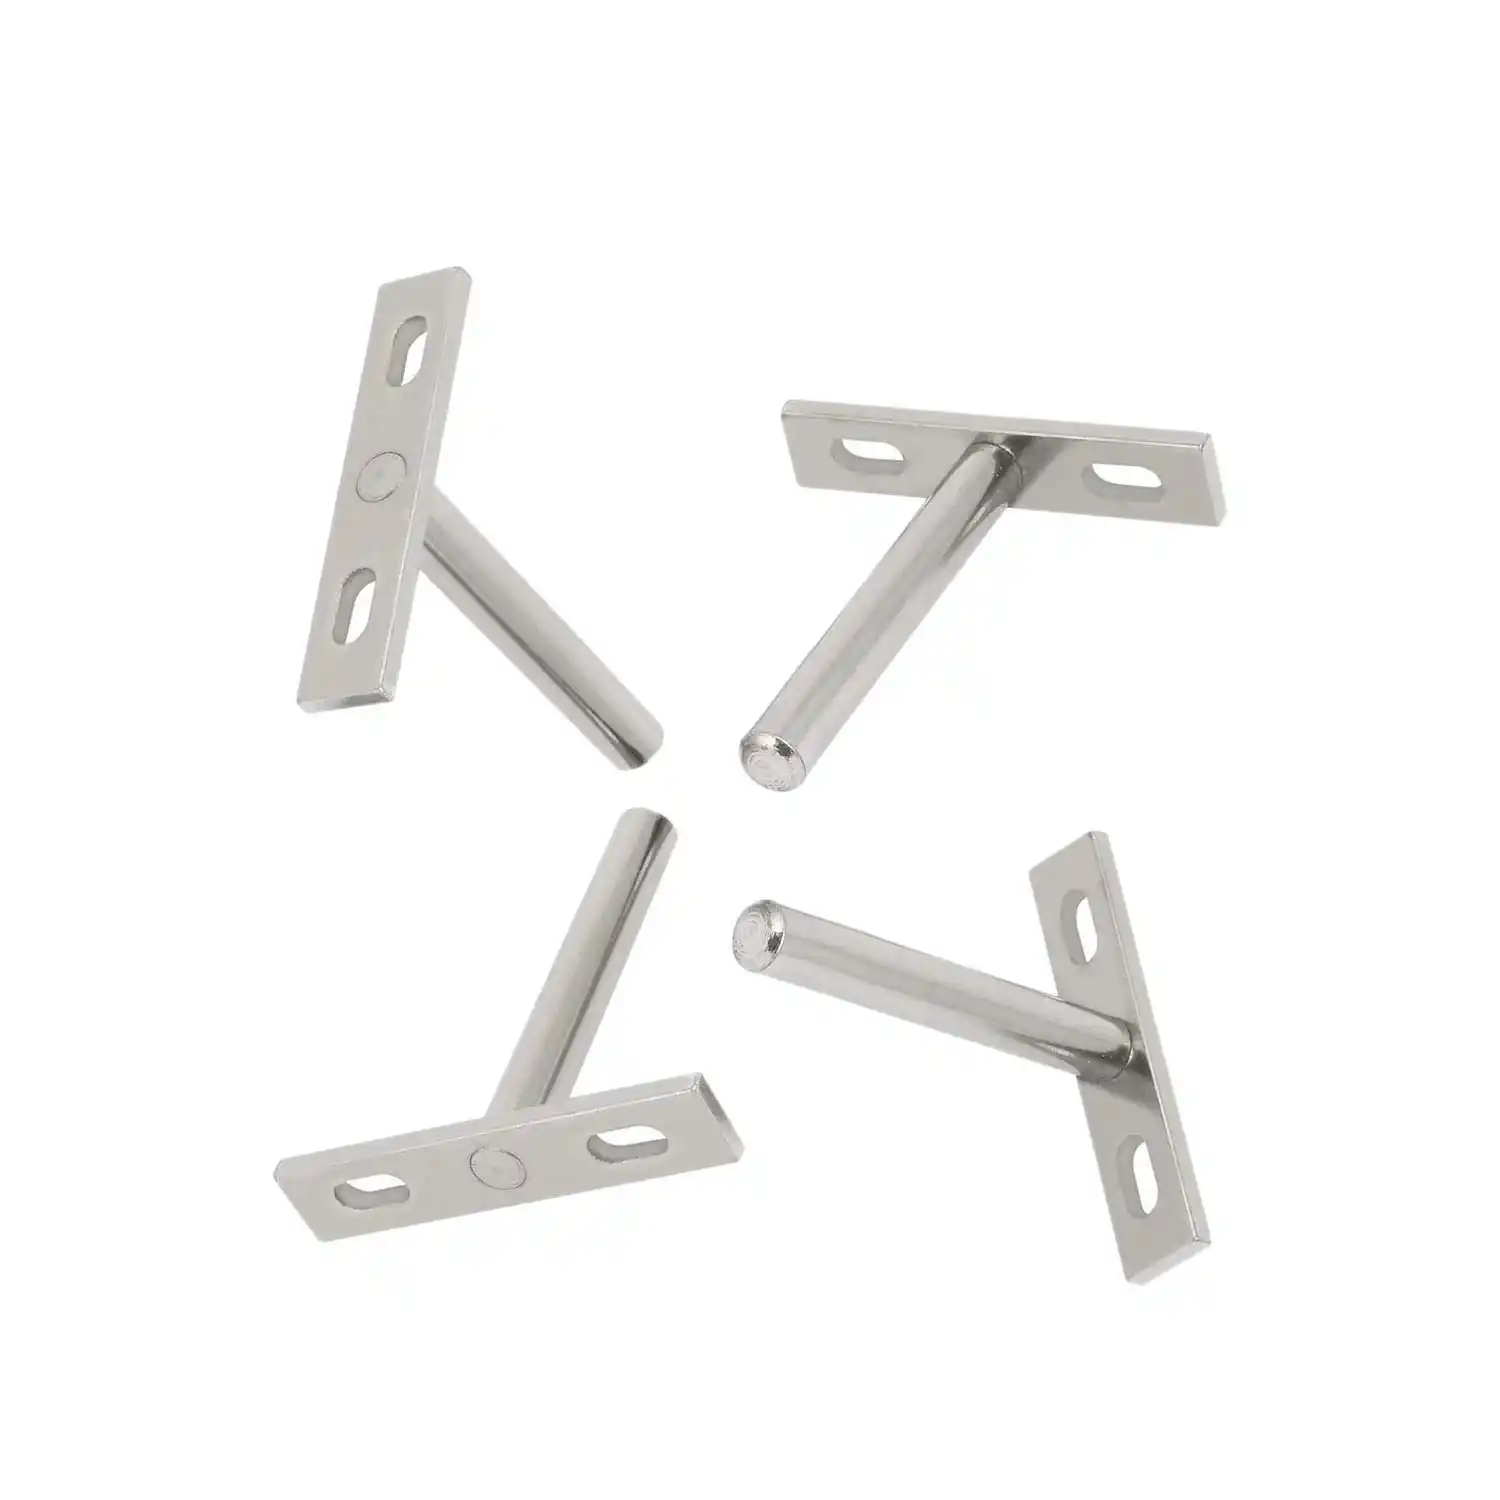 4pcs 10mm X 70mm Metal Hidden Concealed Invisible Shelf Support 3